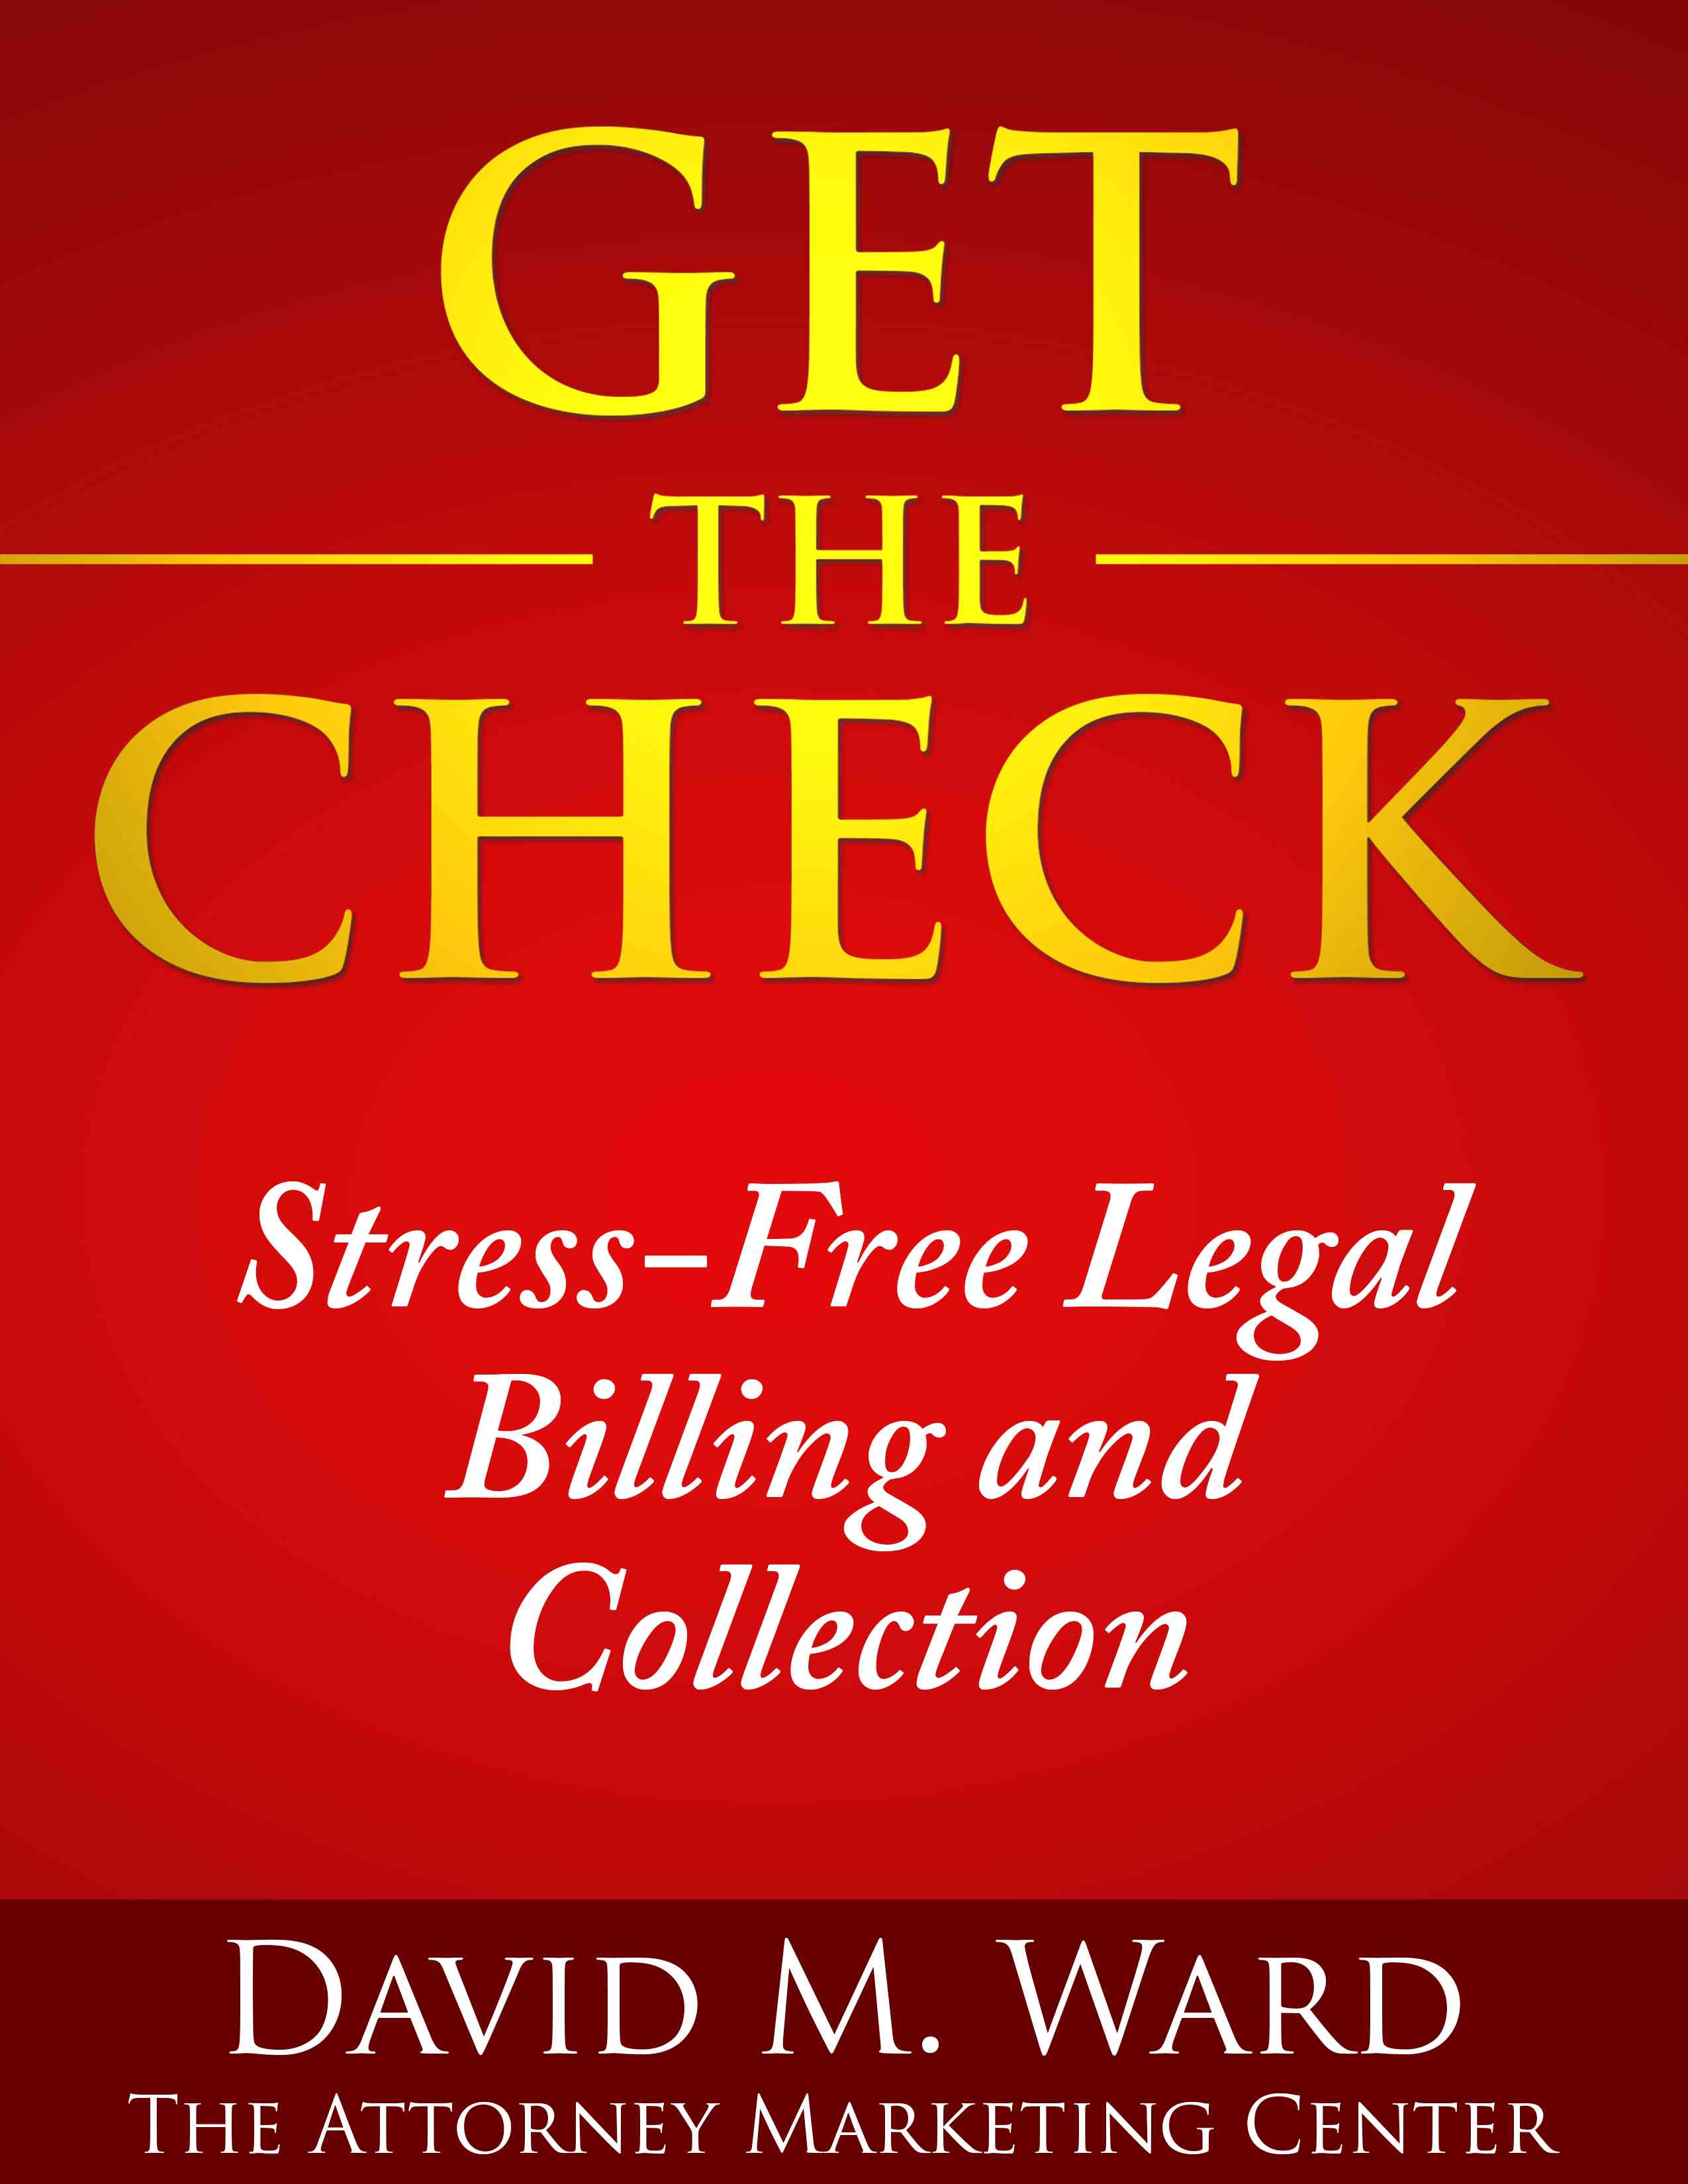 Get the Check: Stress-Free Legal Billing and Collection